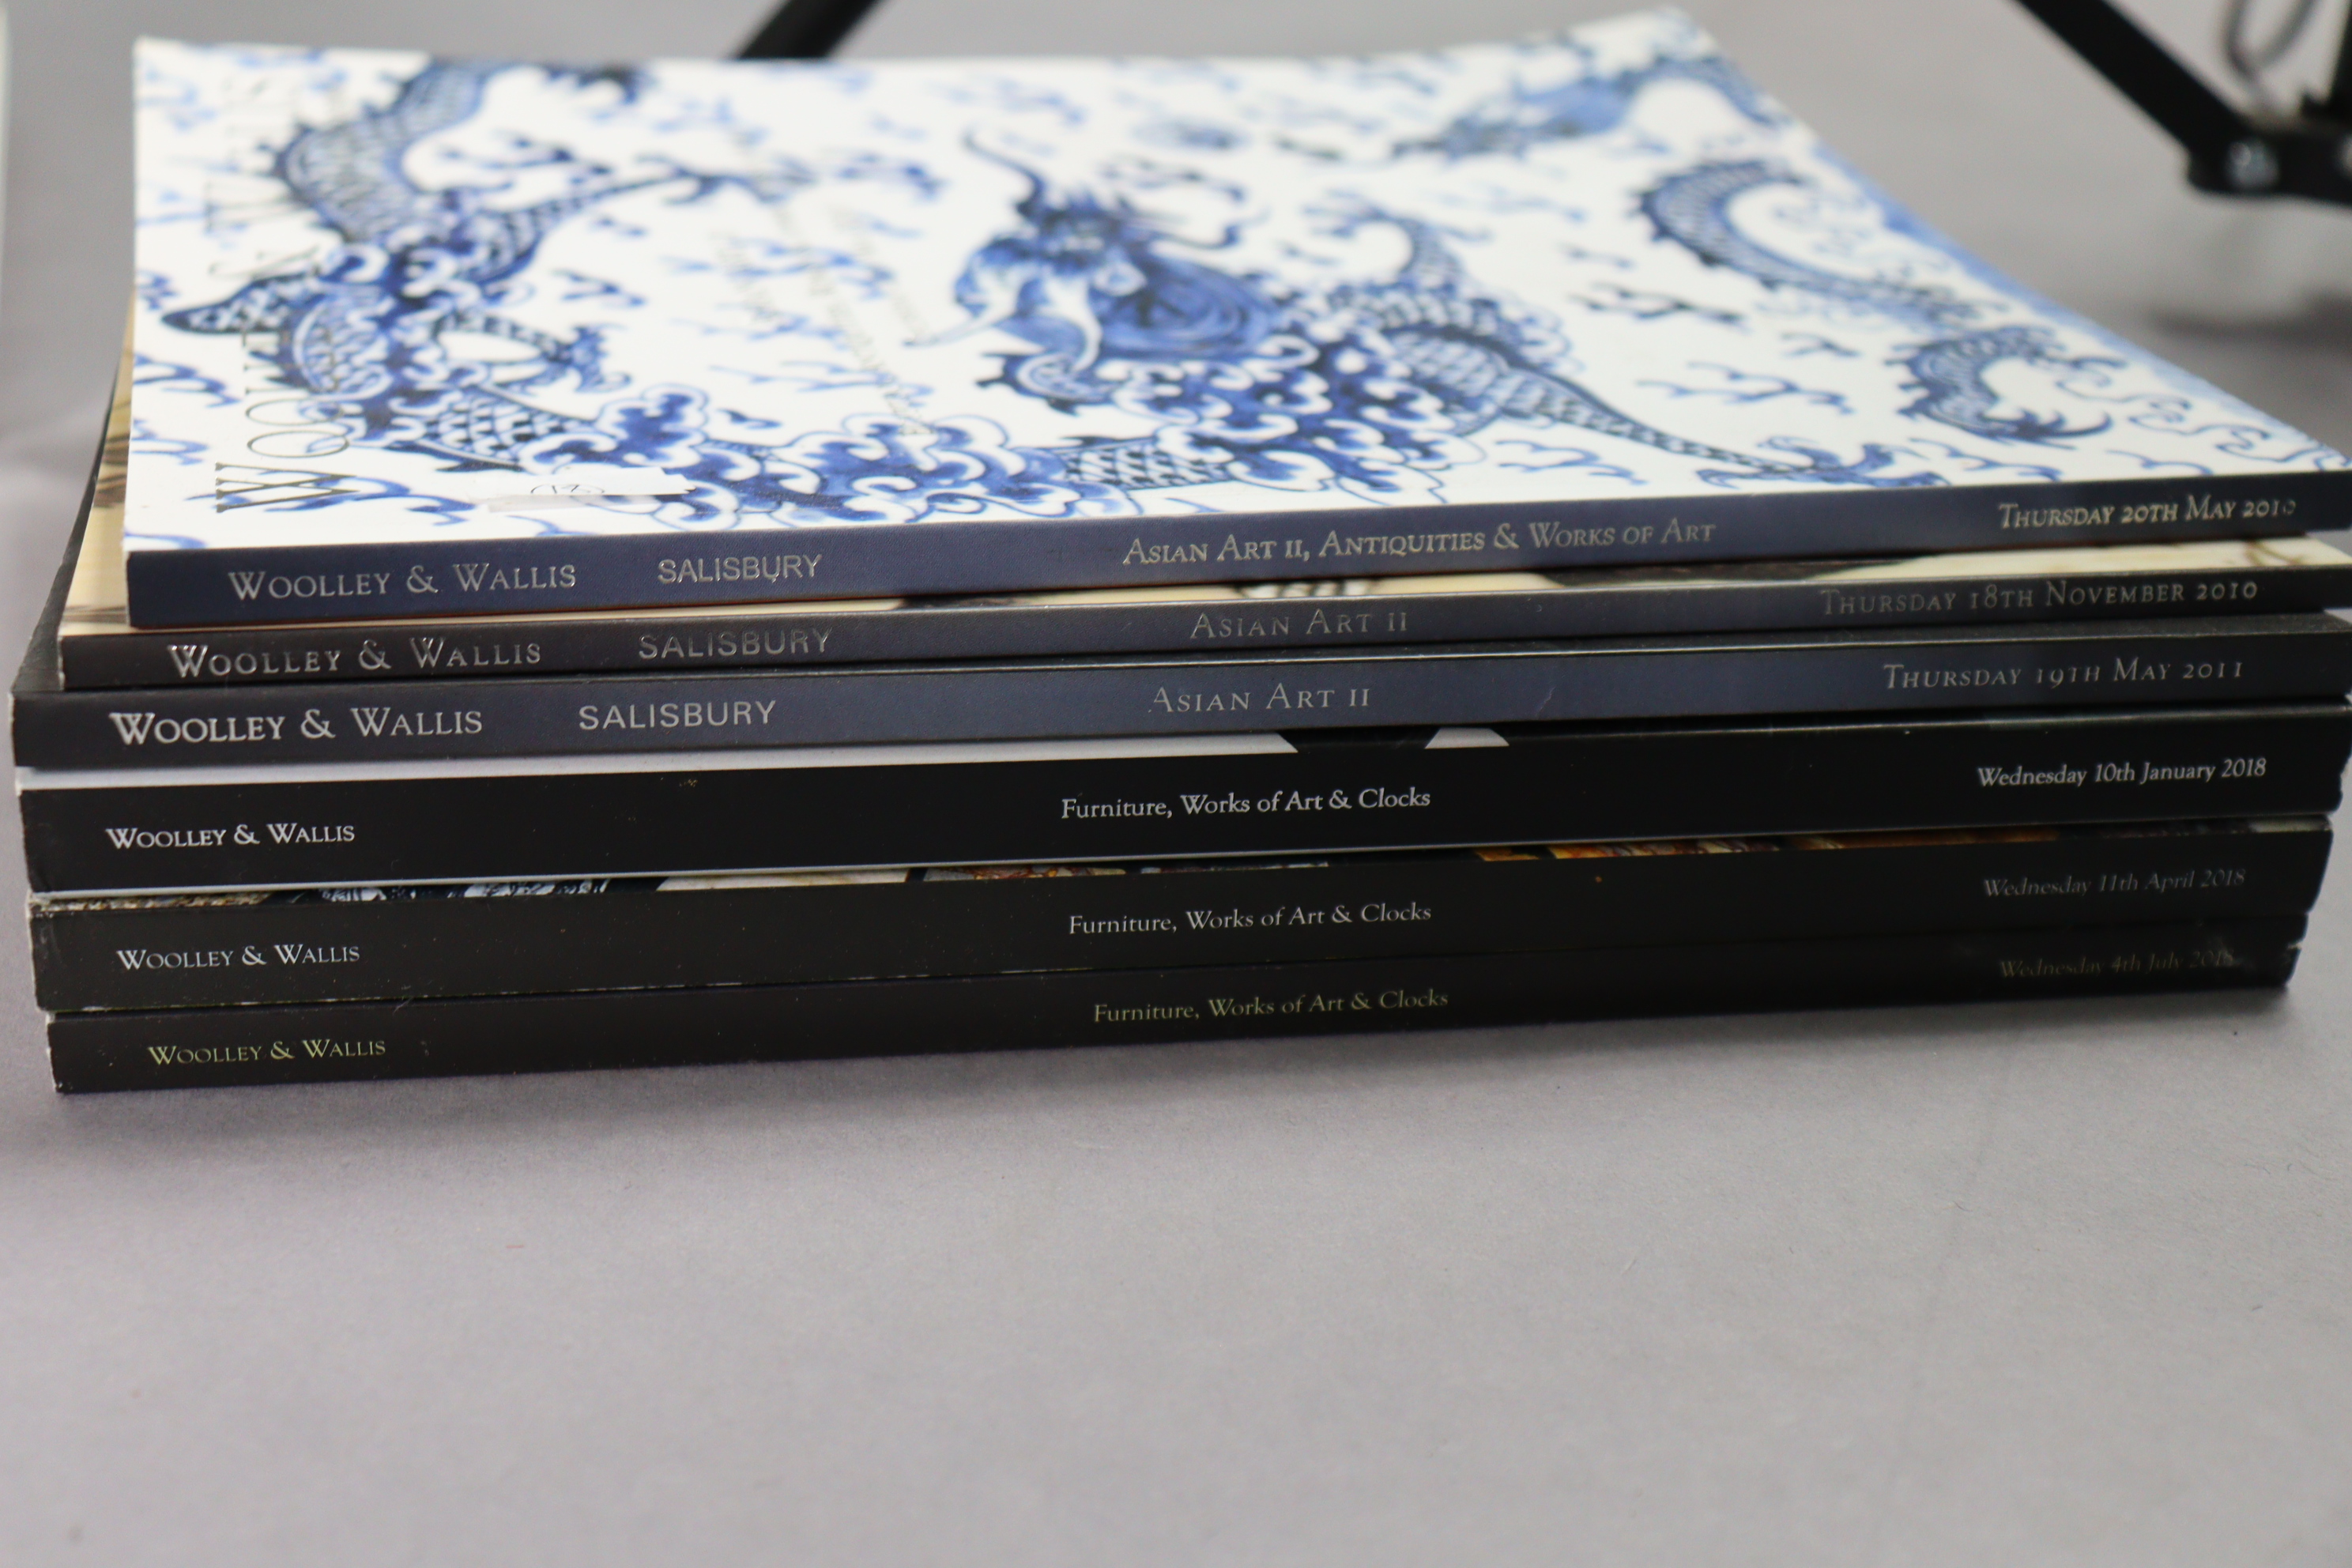 A collection of approx. 90 auction catalogues mostly relating to Asian Art, Chinese porcelain, & - Image 8 of 9